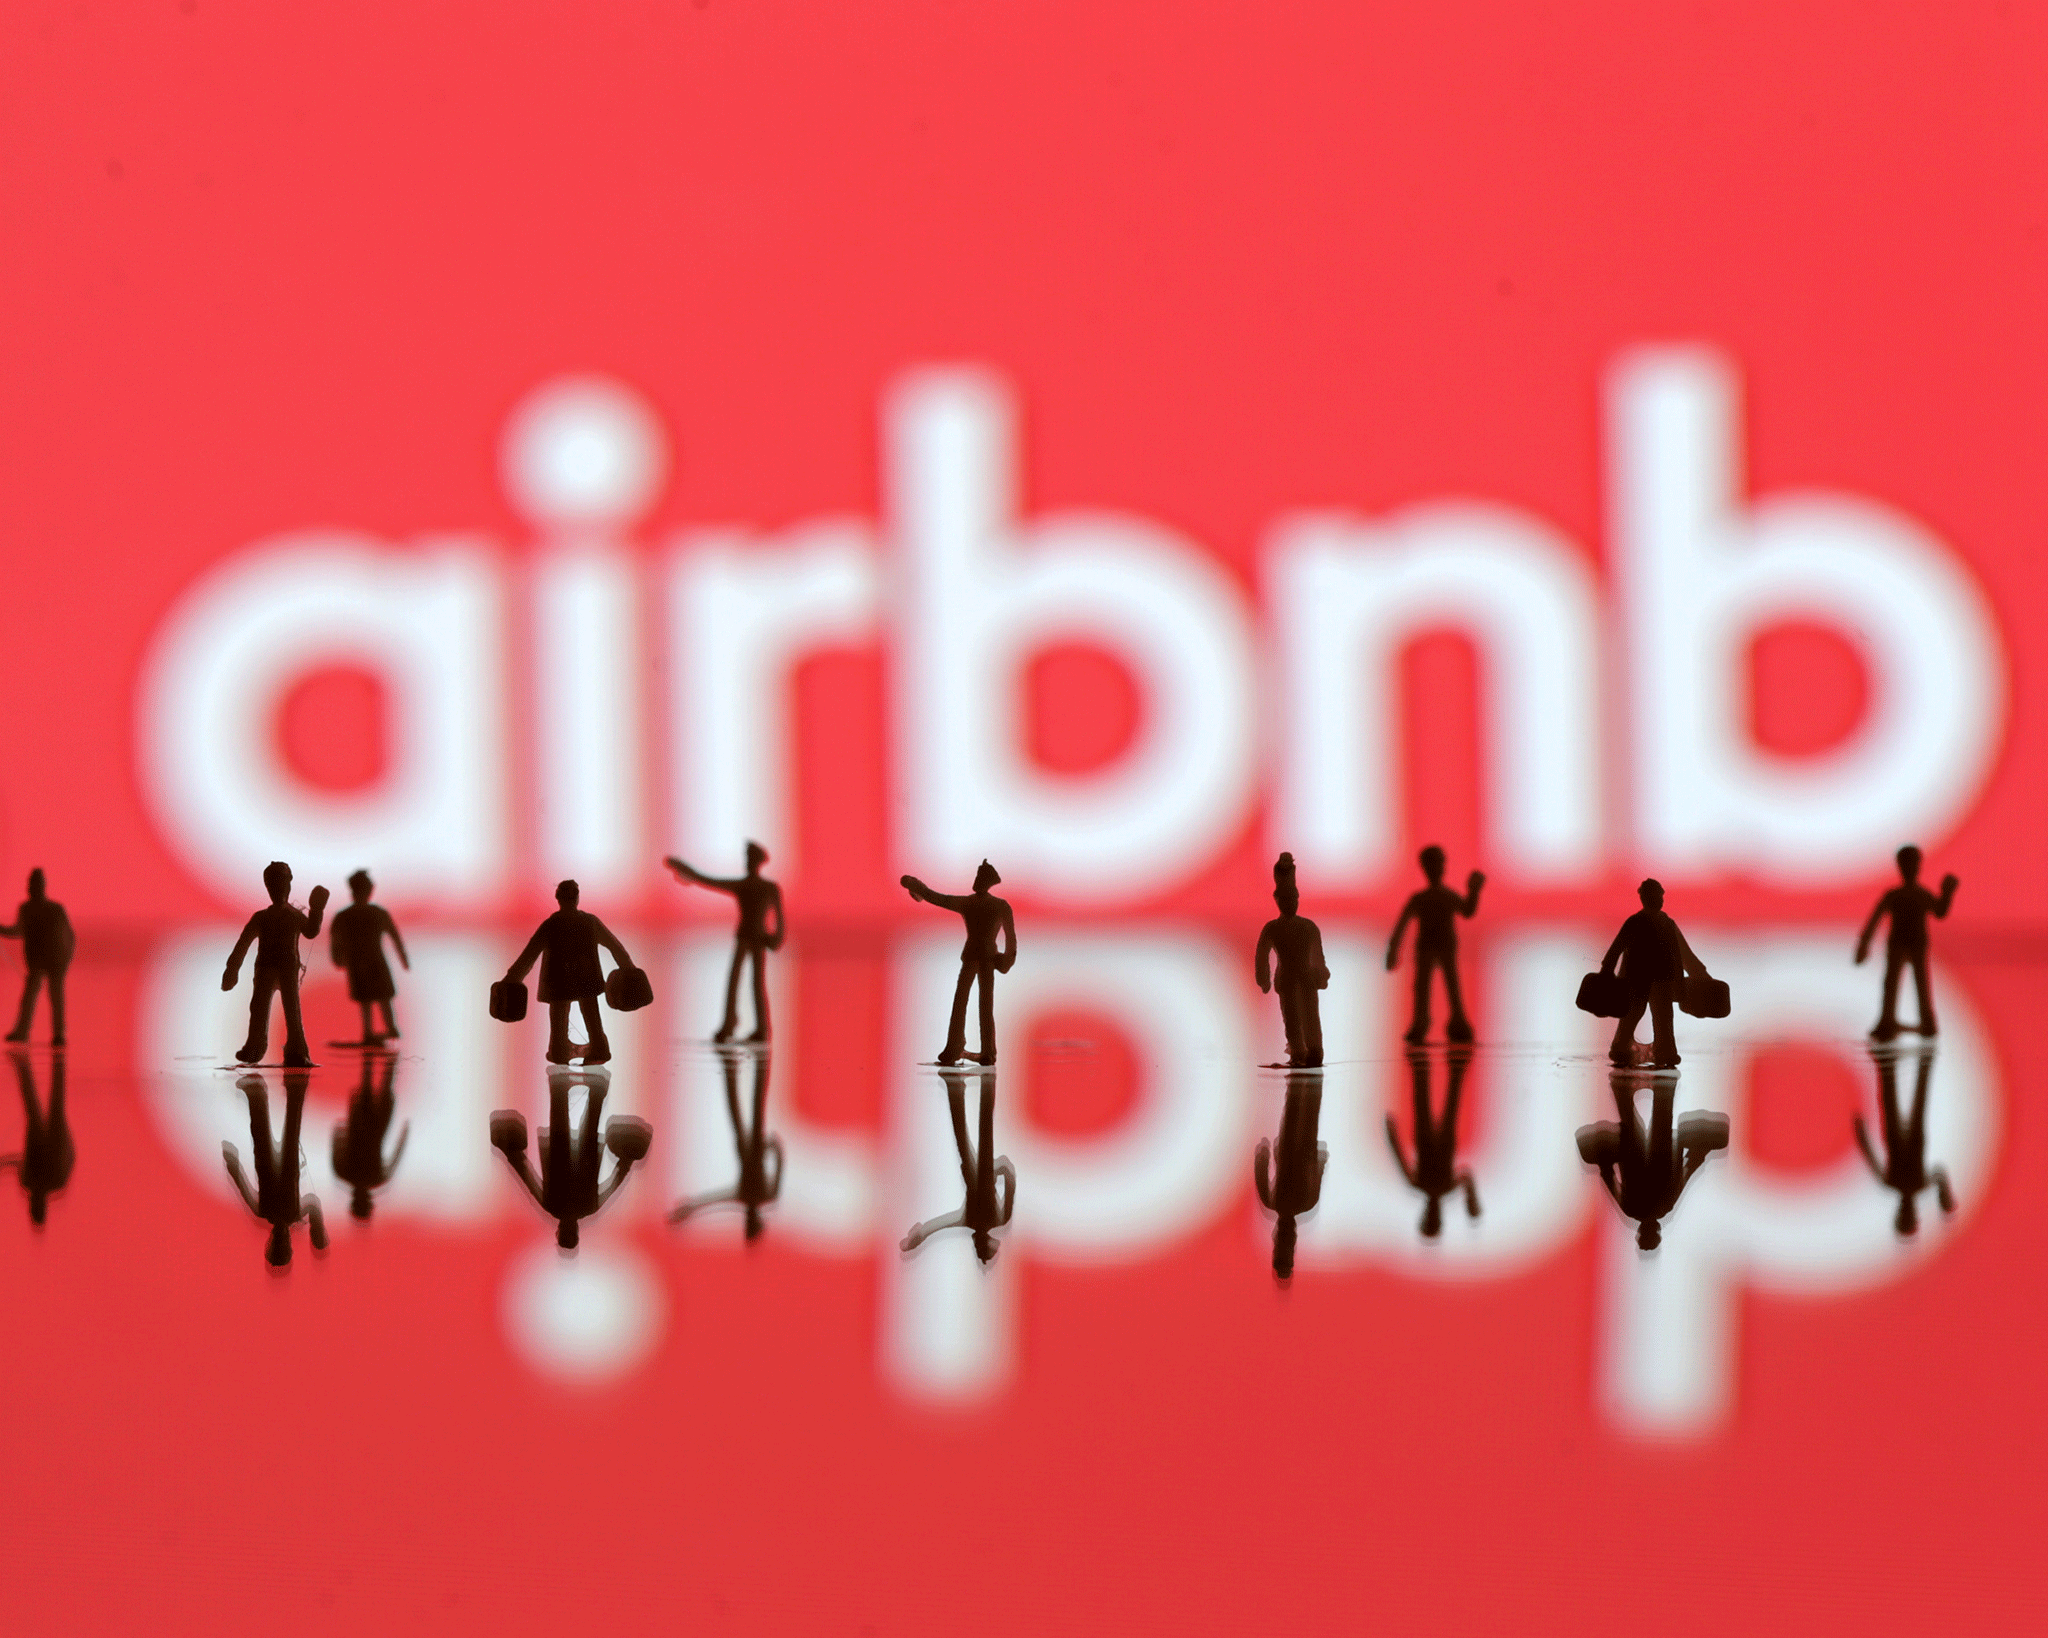 Airbnb has come under increasing regulatory scrutiny in several cities over the past year